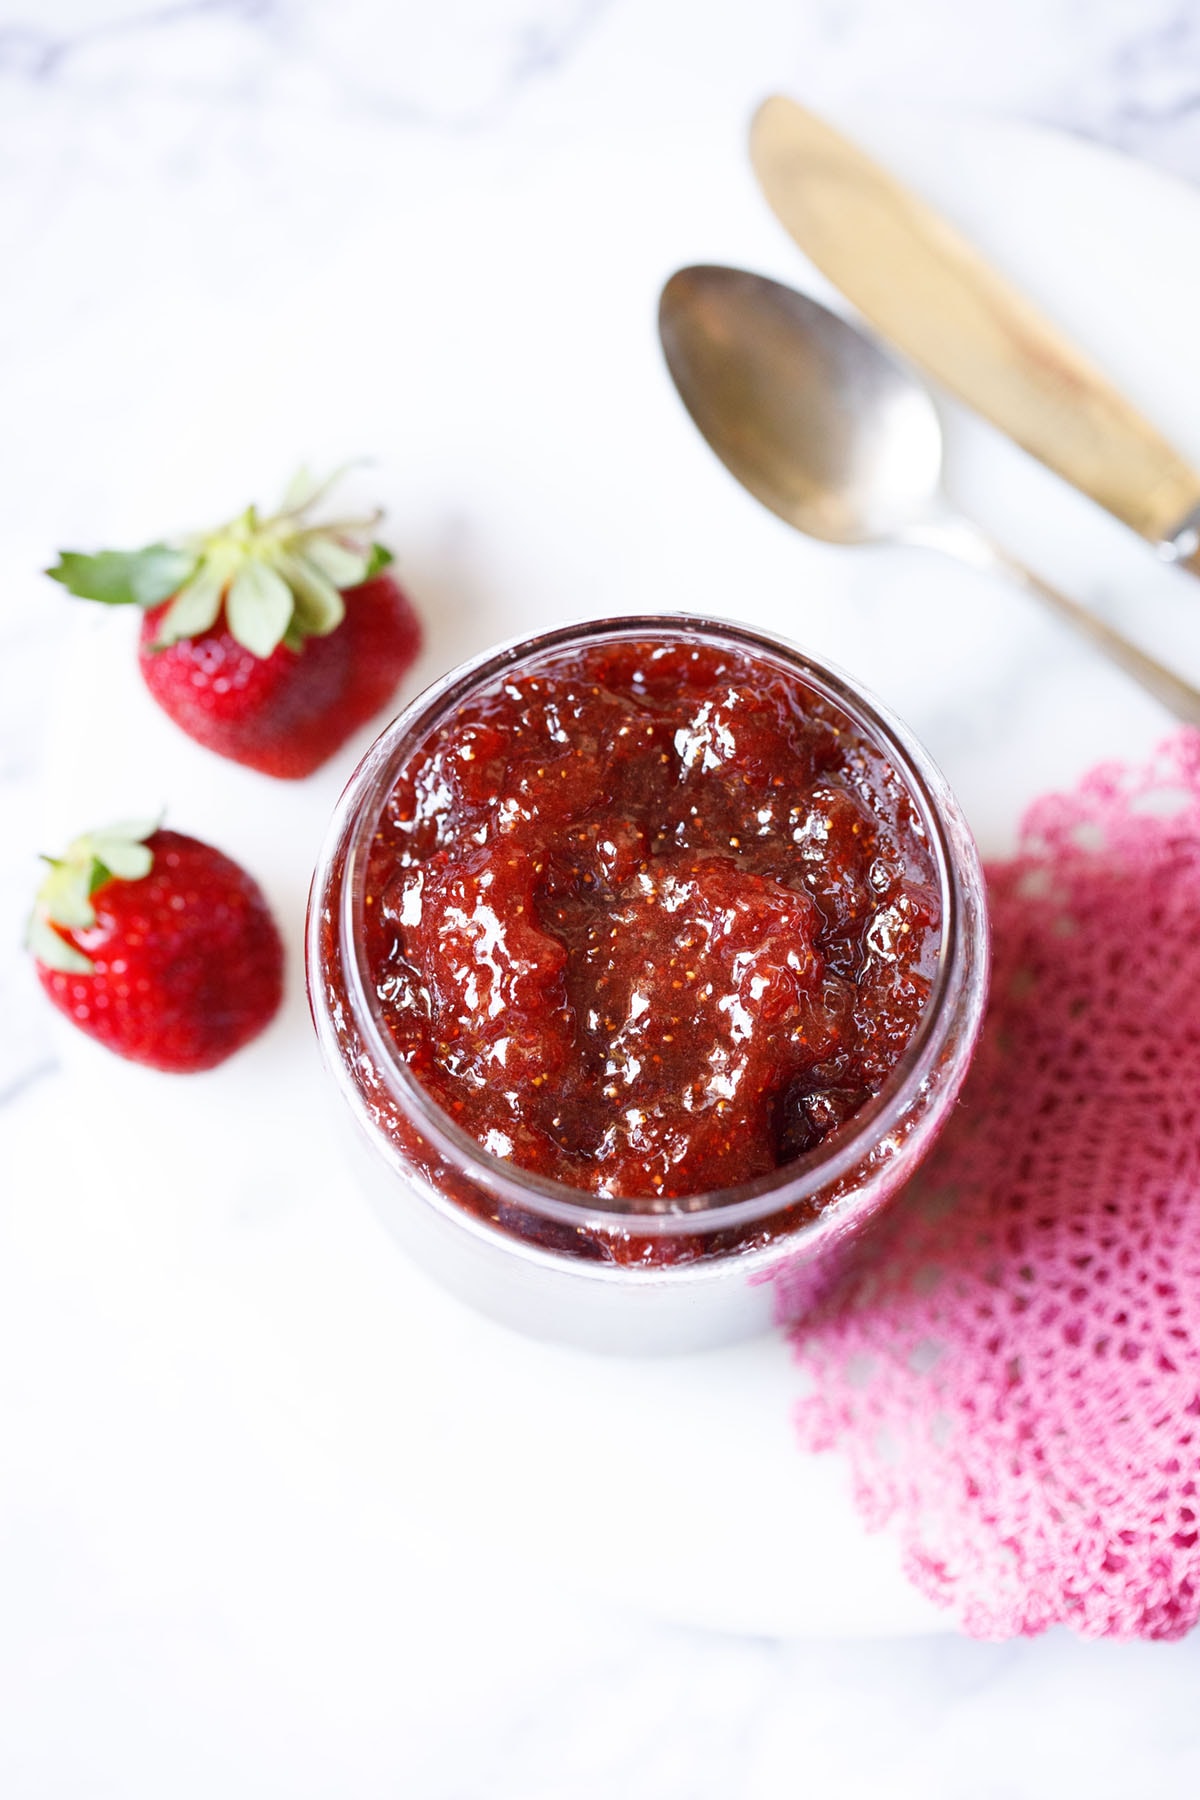 overhead shot of easy homemade strawberry jam in a clear glass jar with two strawberries and a pink crocheted doily on the table.